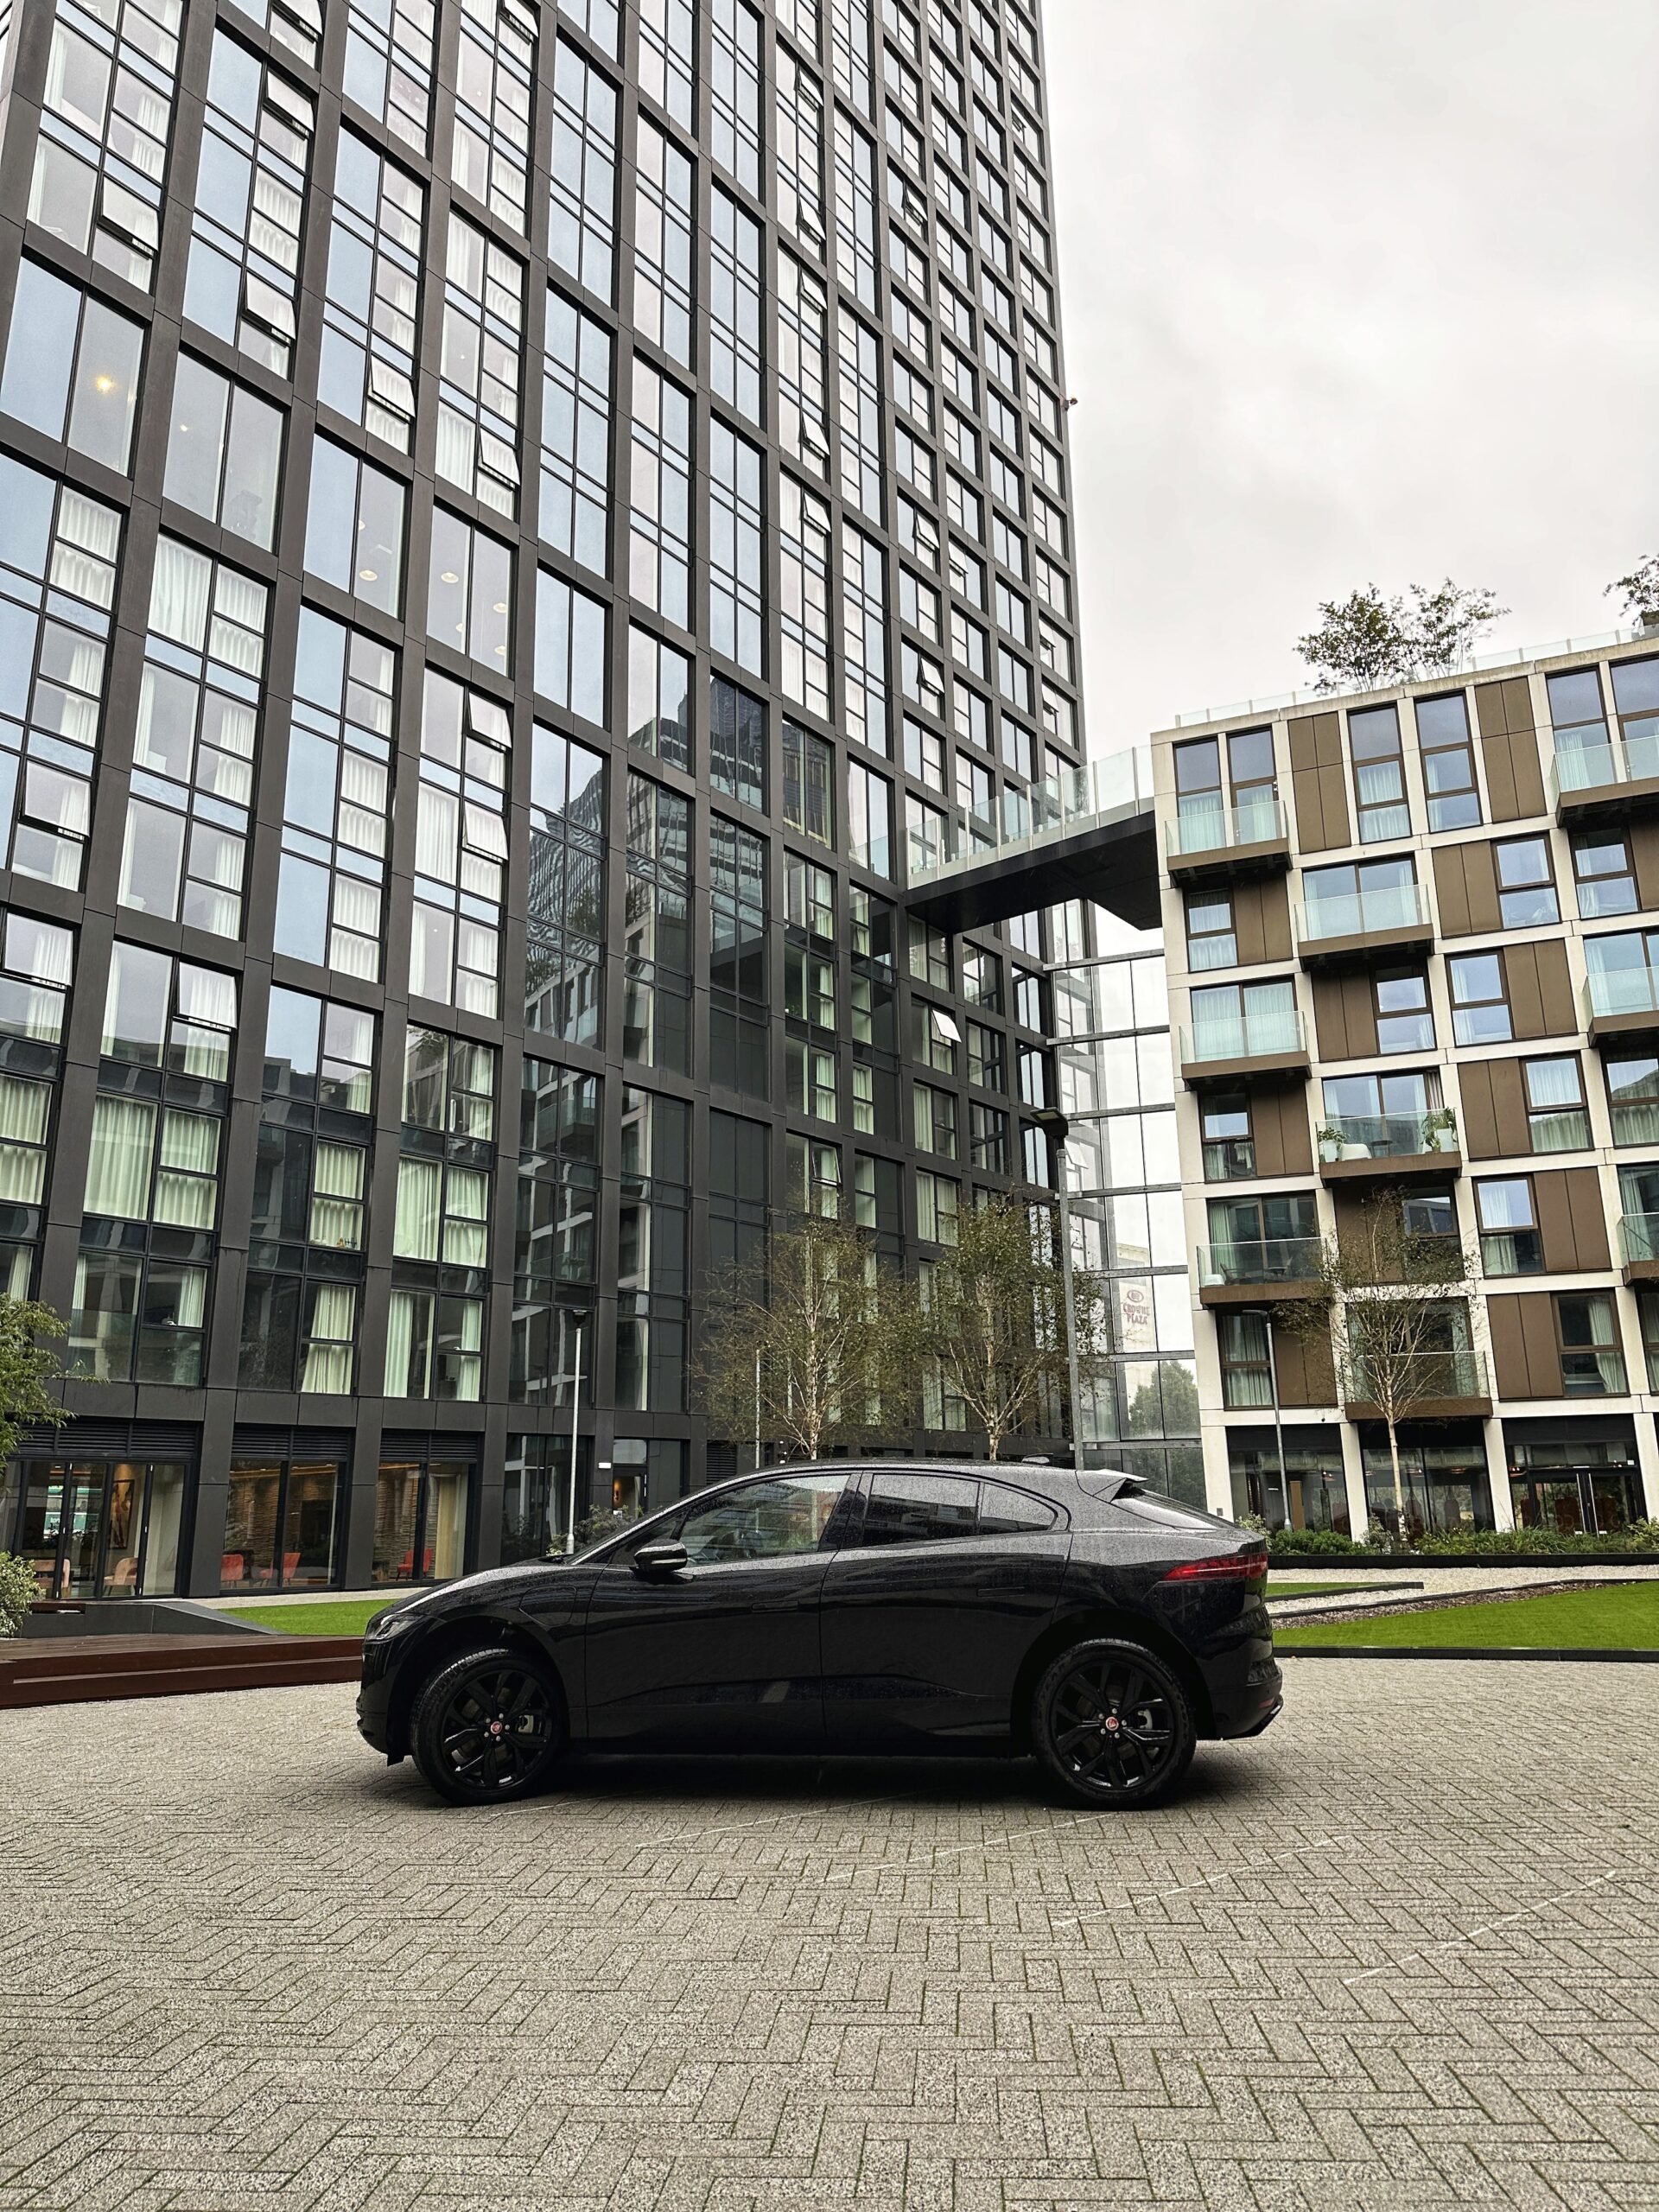 One of the Jaguar I-PACE electric SUVs that Moda, Angel Gardens residents can book. Credit: The Manc Group